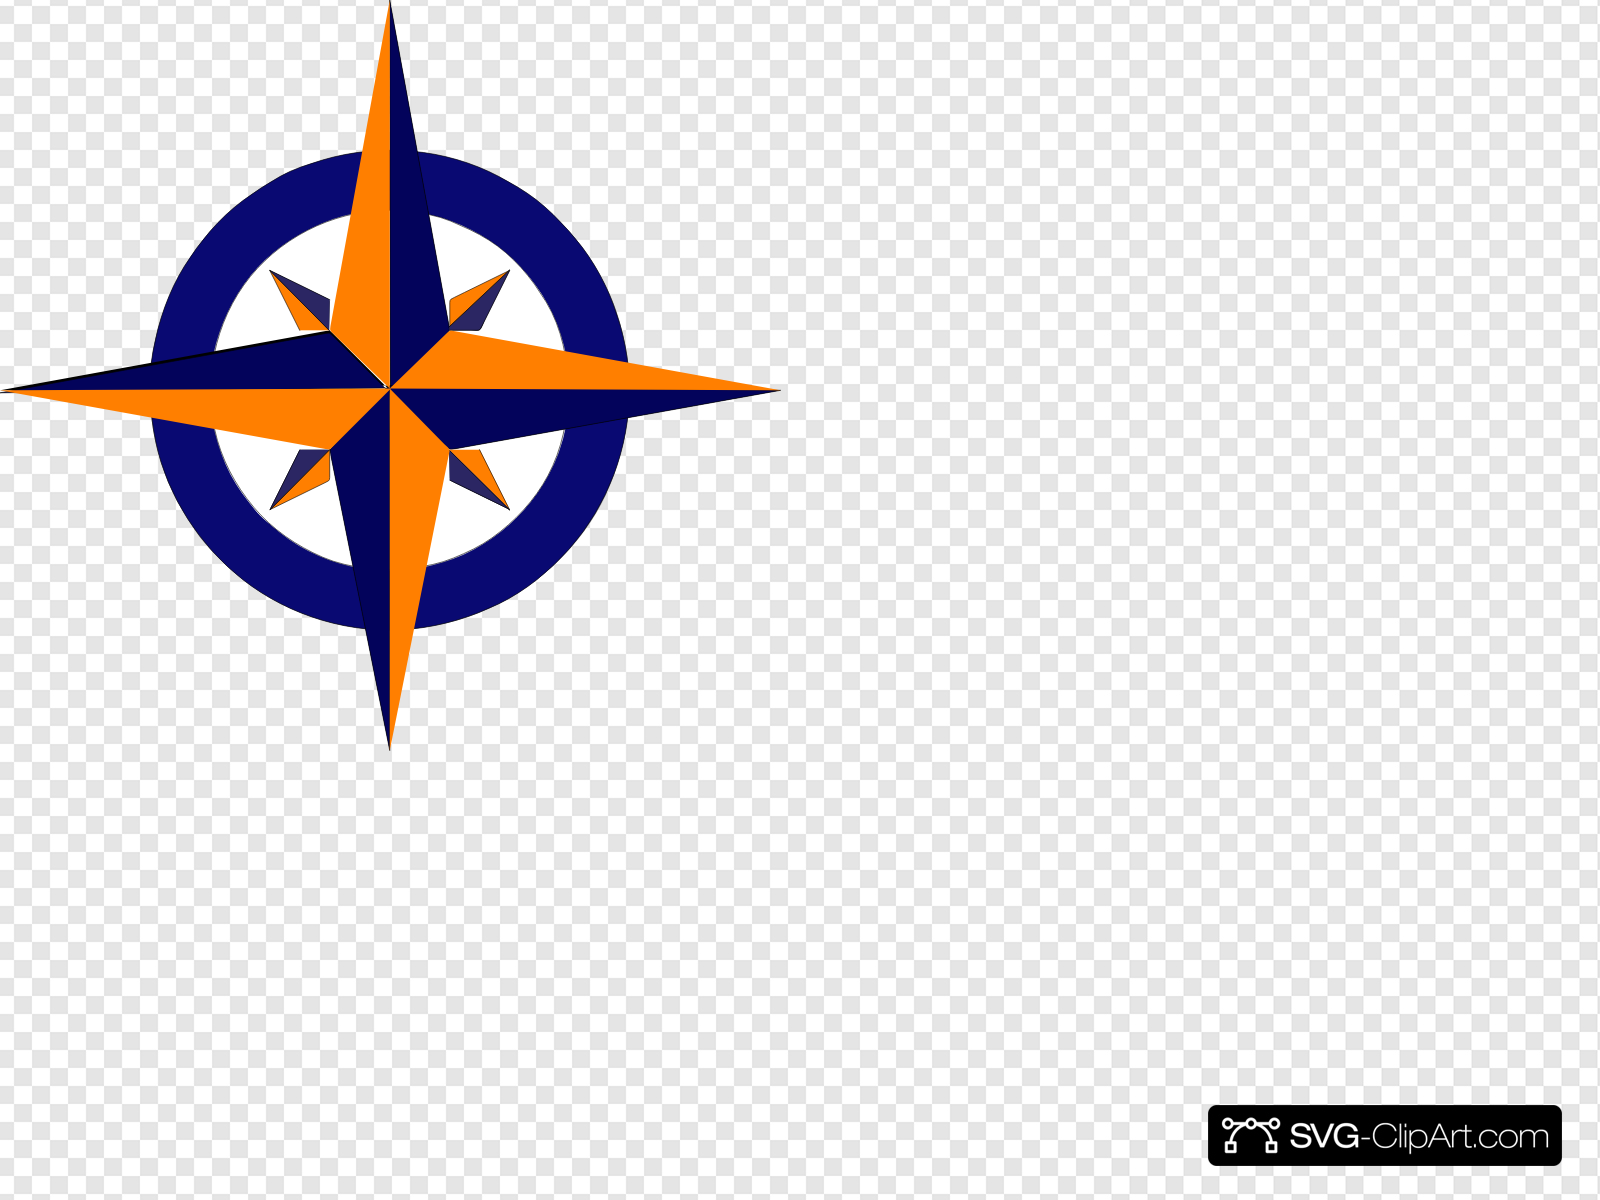 Compass Blue And Orange Compass Clip art, Icon and SVG